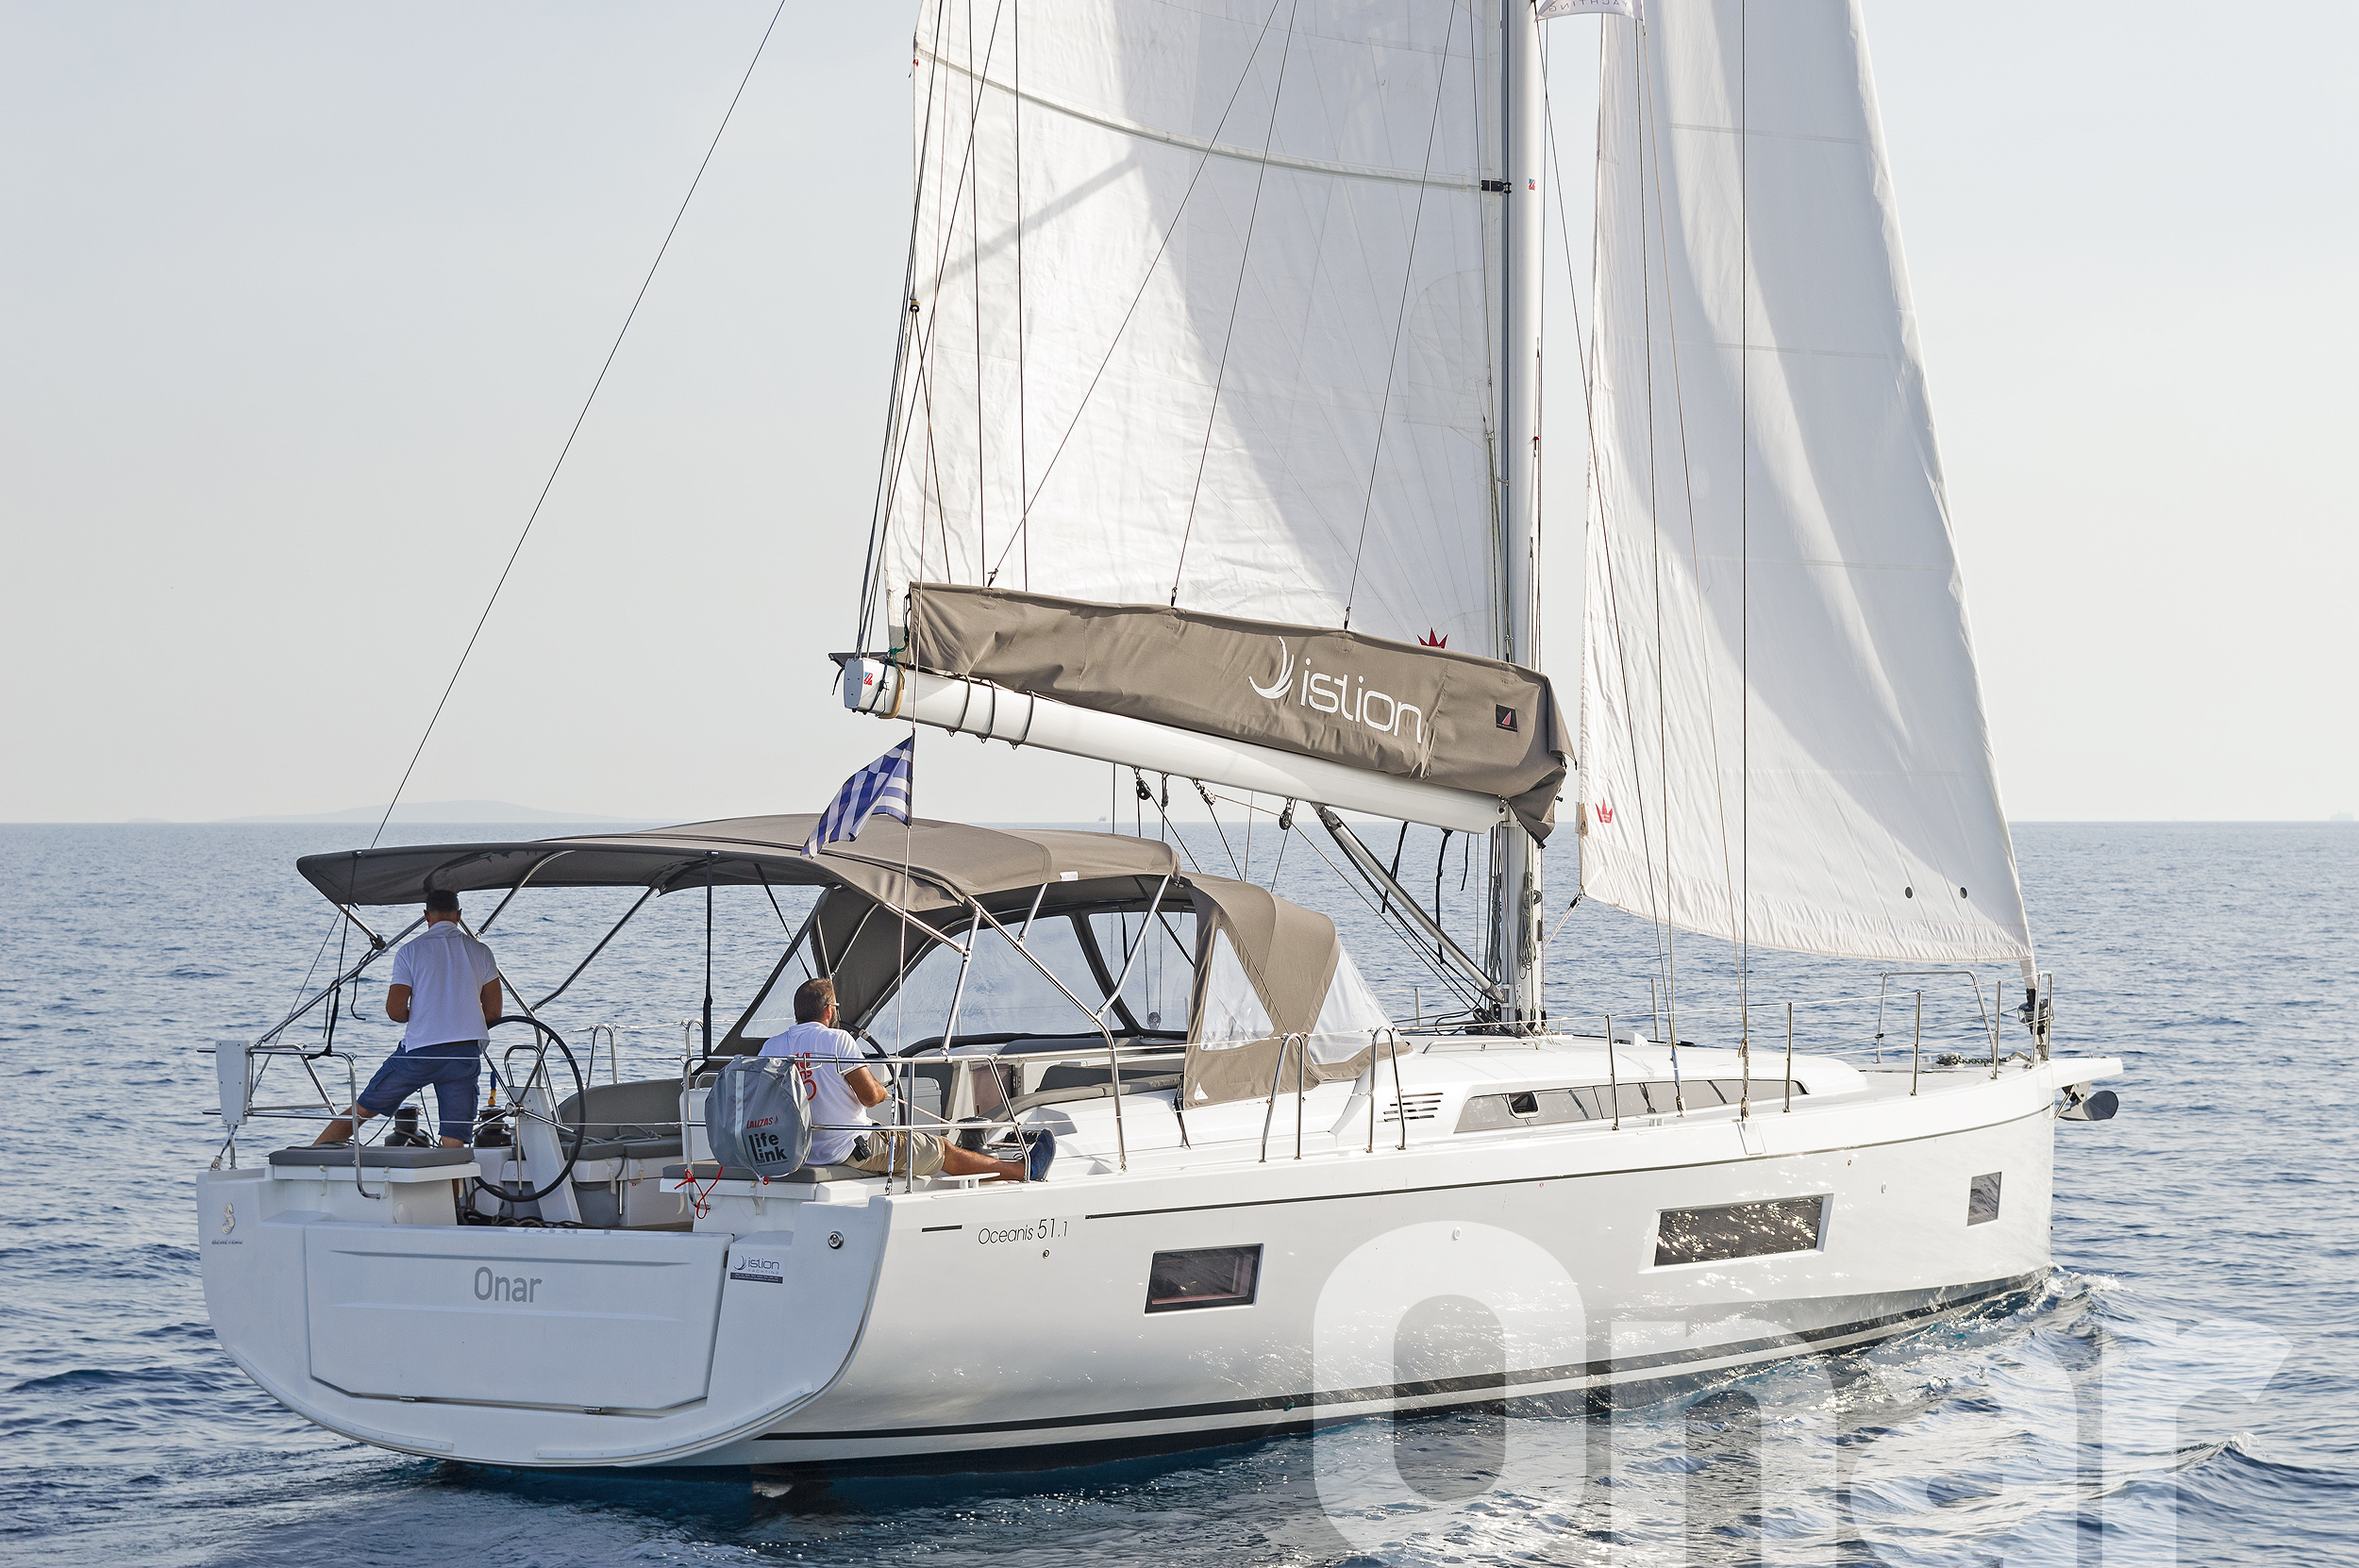 Oceanis 51.1 - Yacht Charter Hellestad & Boat hire in Greece Athens and Saronic Gulf Athens Alimos Alimos Marina 1